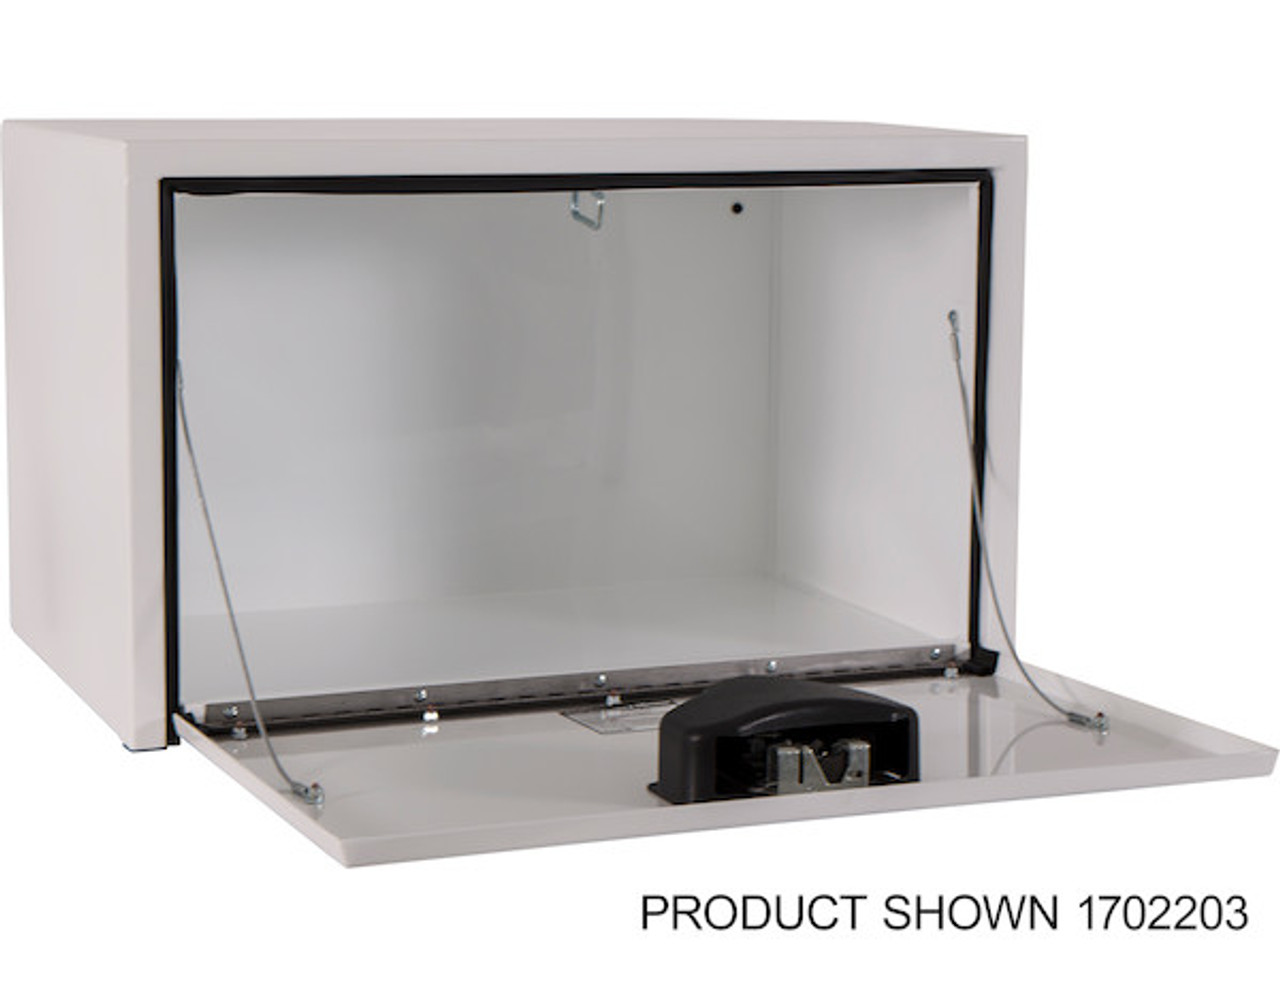 1702210 - 18x18x48 Inch White Steel Underbody Truck Box with 2 Paddle Latches